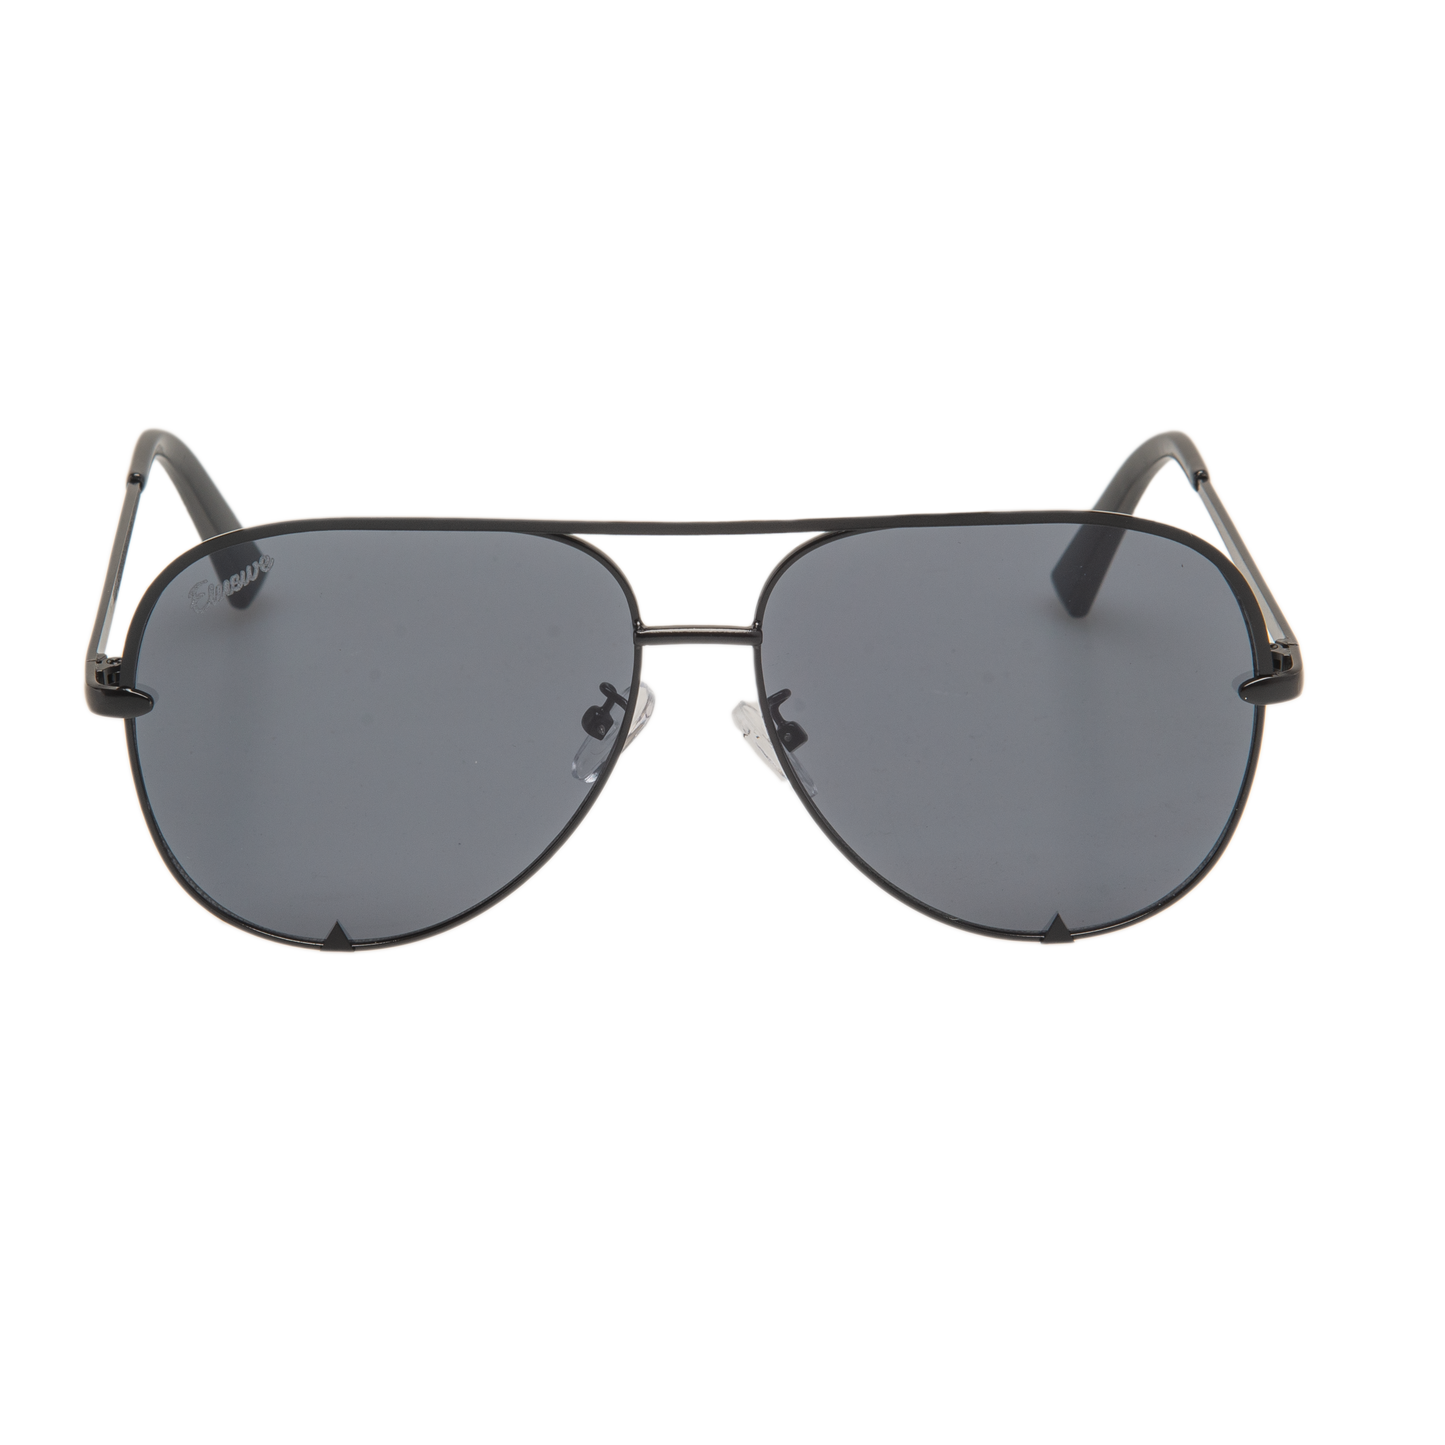 High Class Smoked lens with black frame.